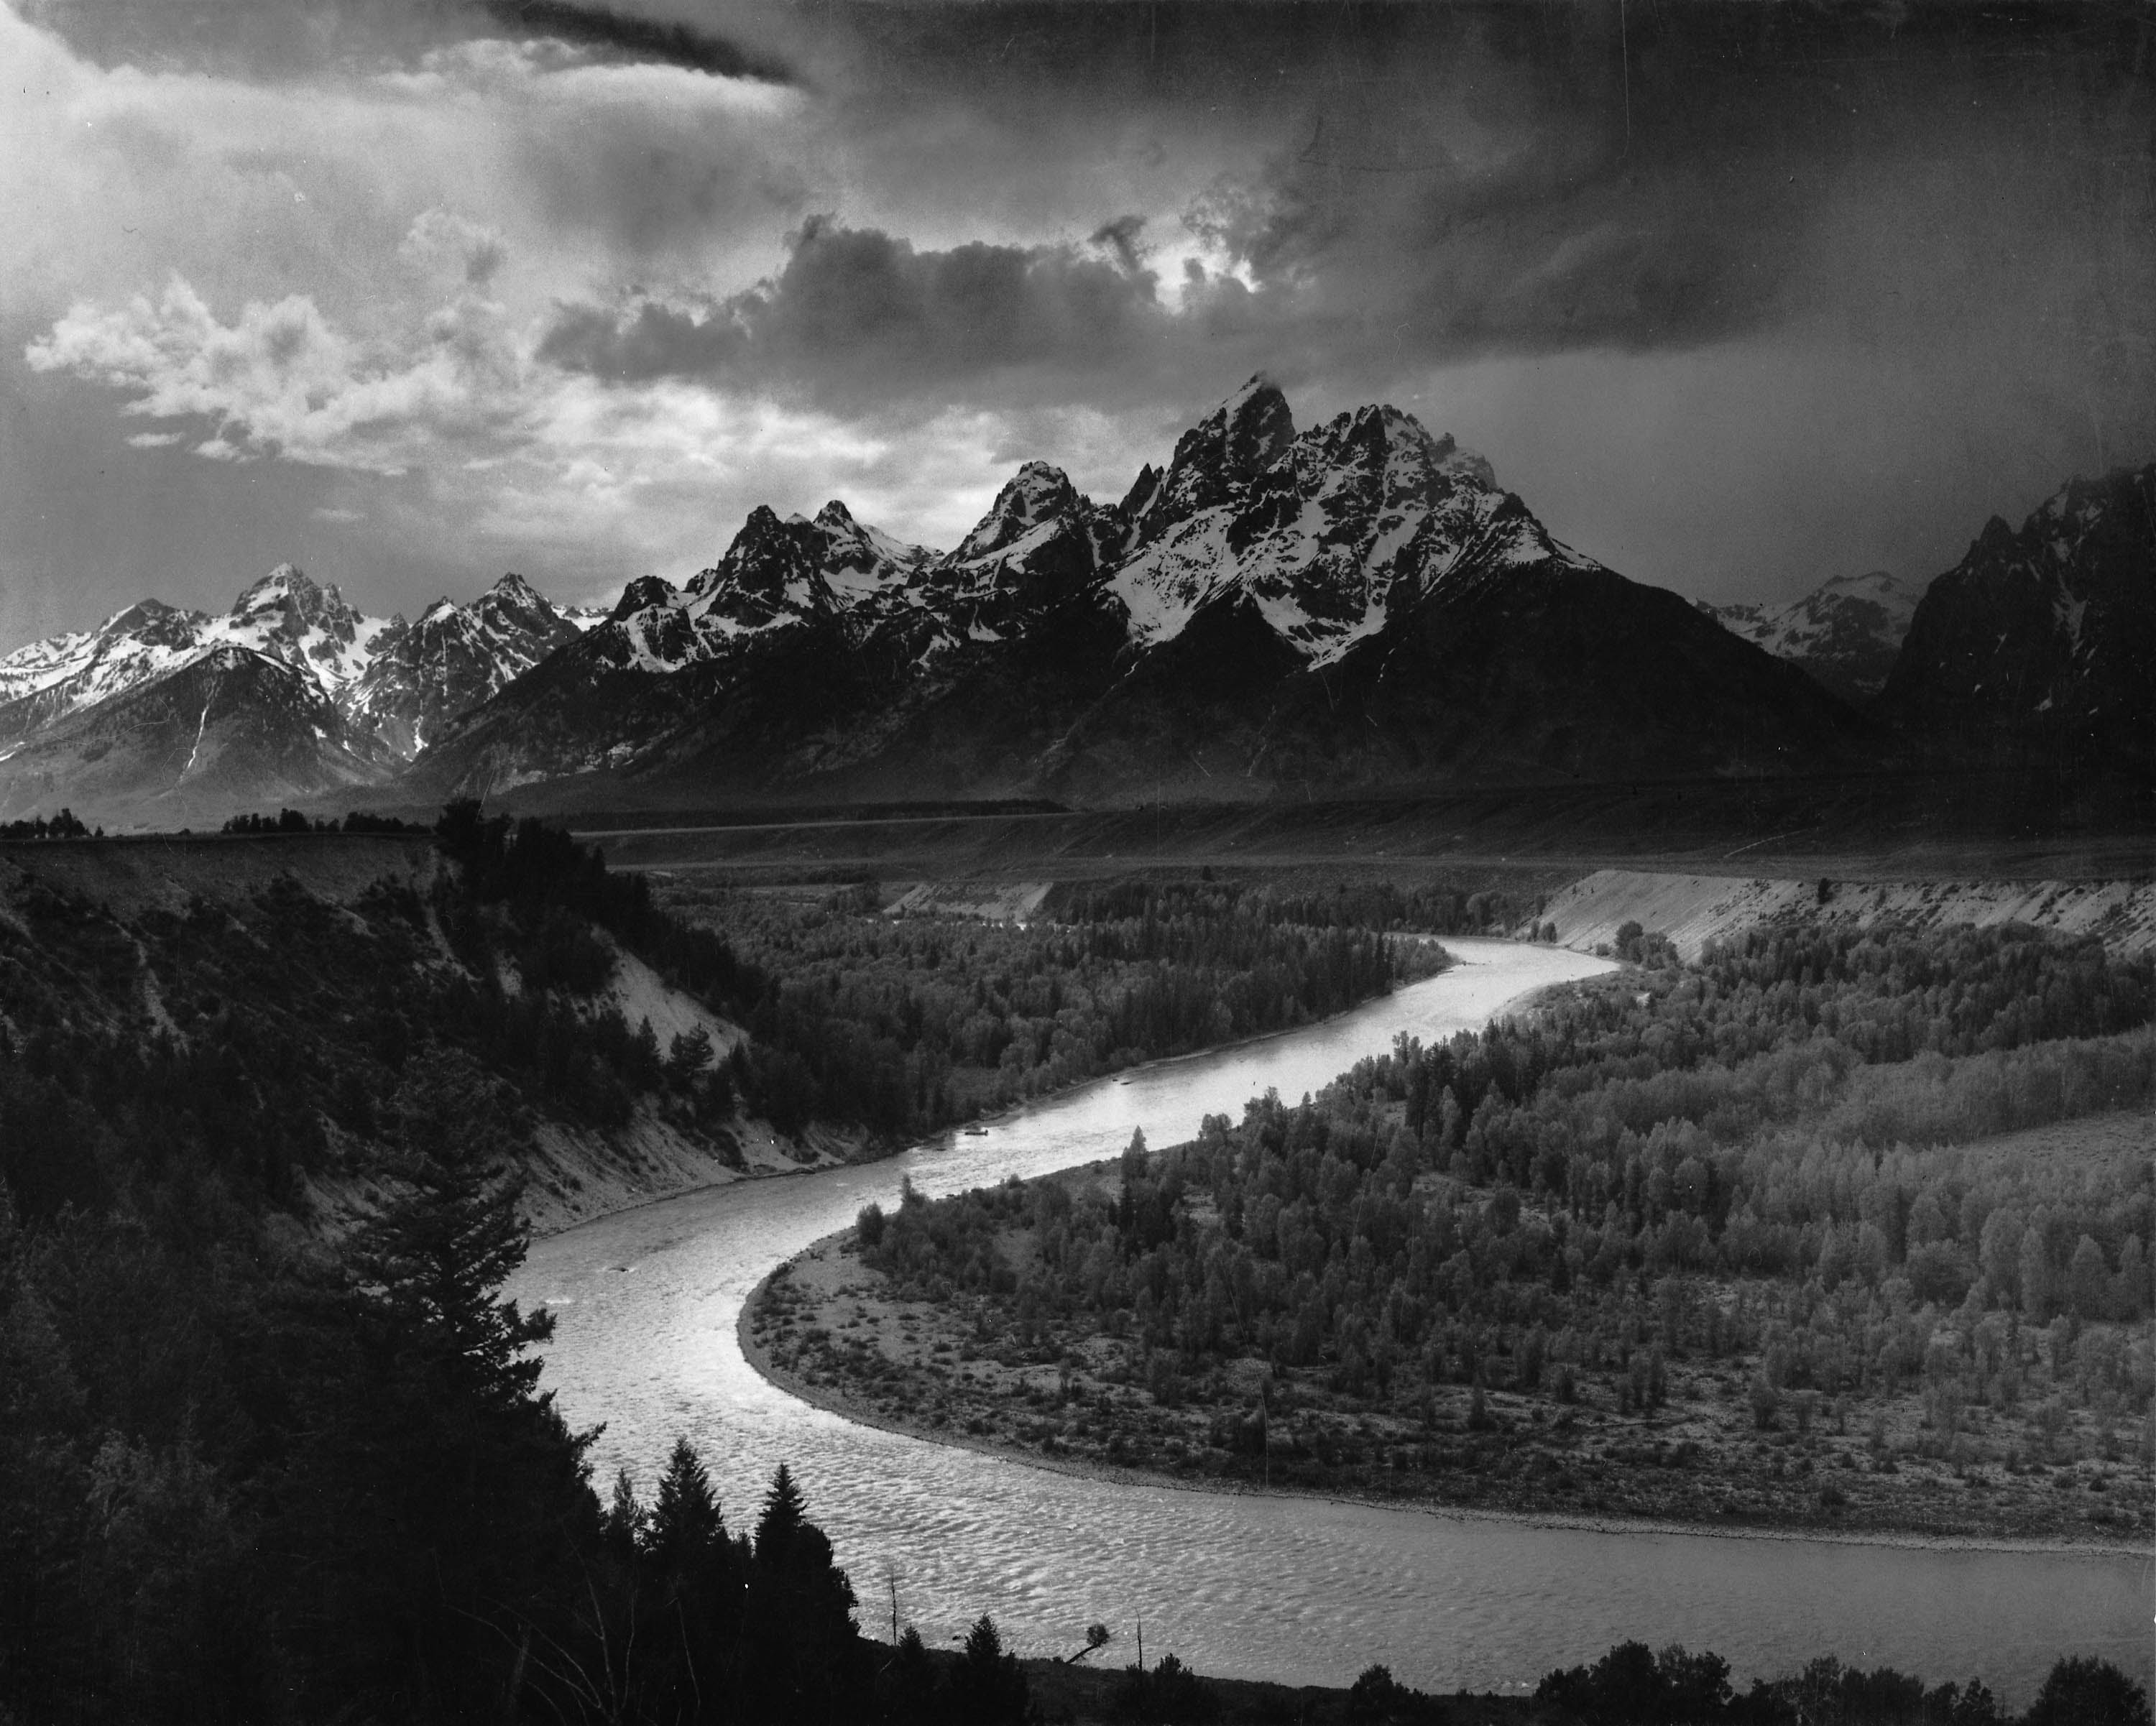 http://www.archives.gov/press/press-kits/picturing-the-century-photos/images/tetons-snake-river.jpg